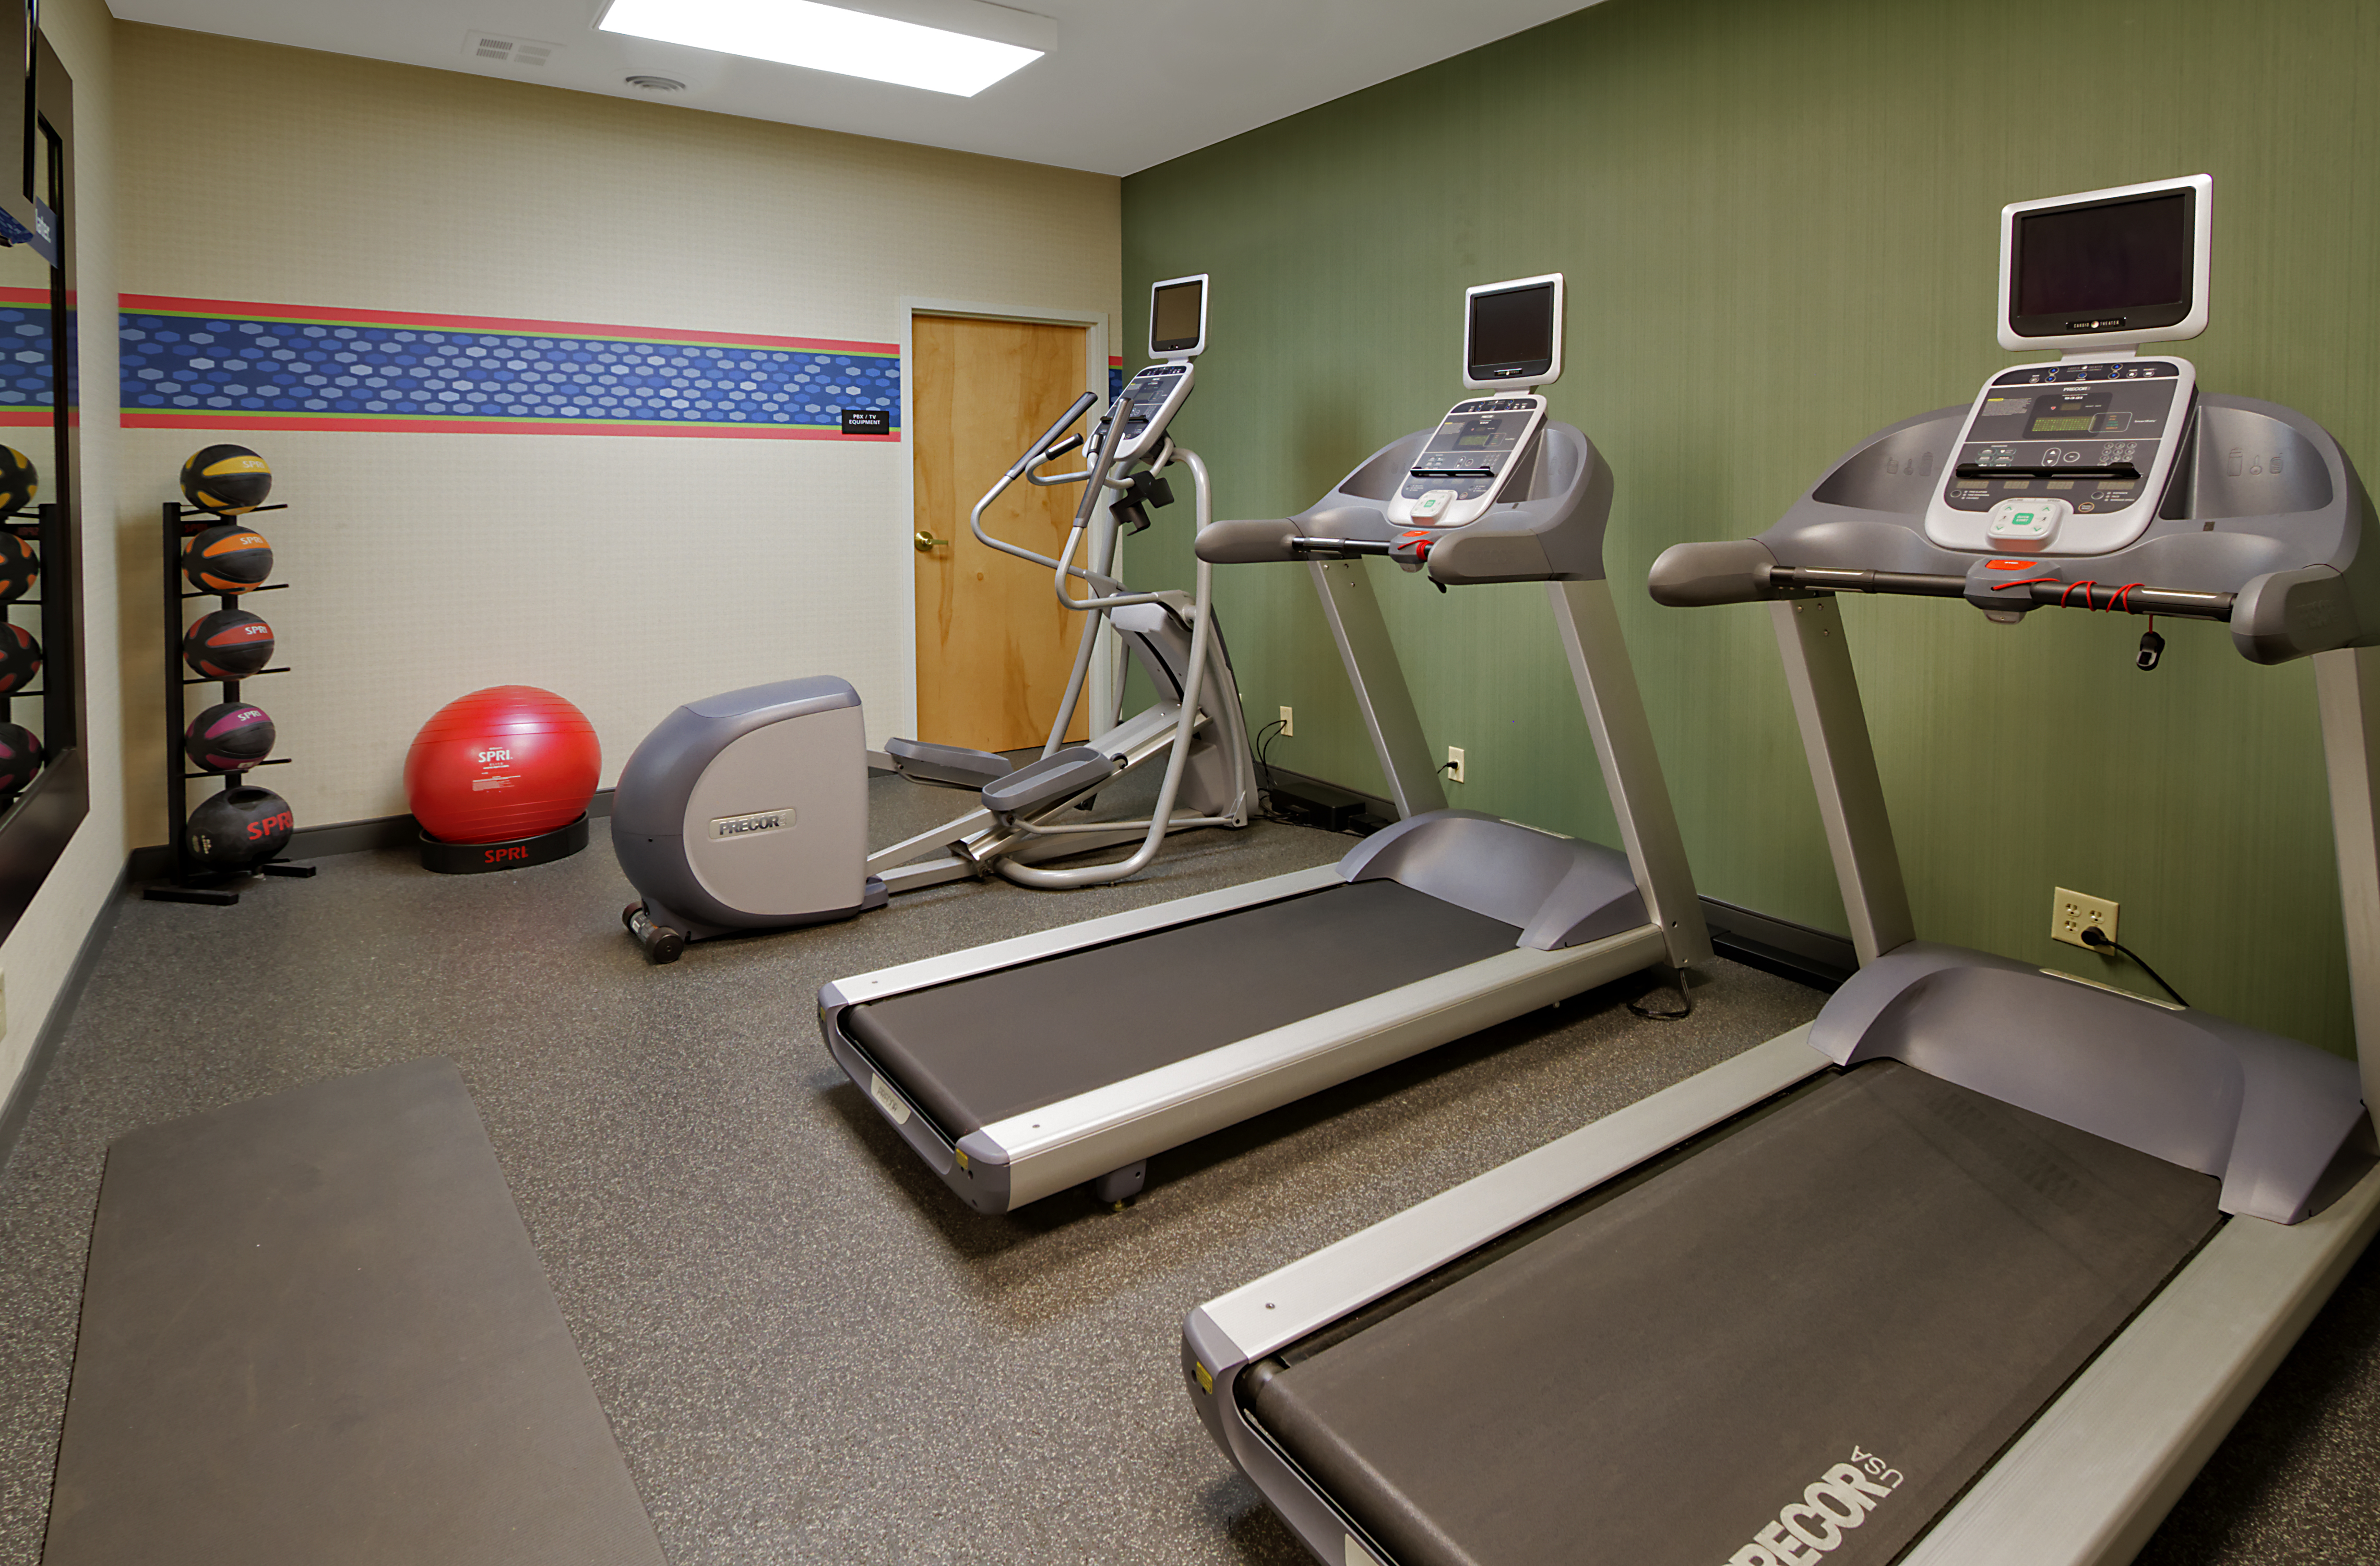 Fully equipped fitness center in Kalamazoo, MI